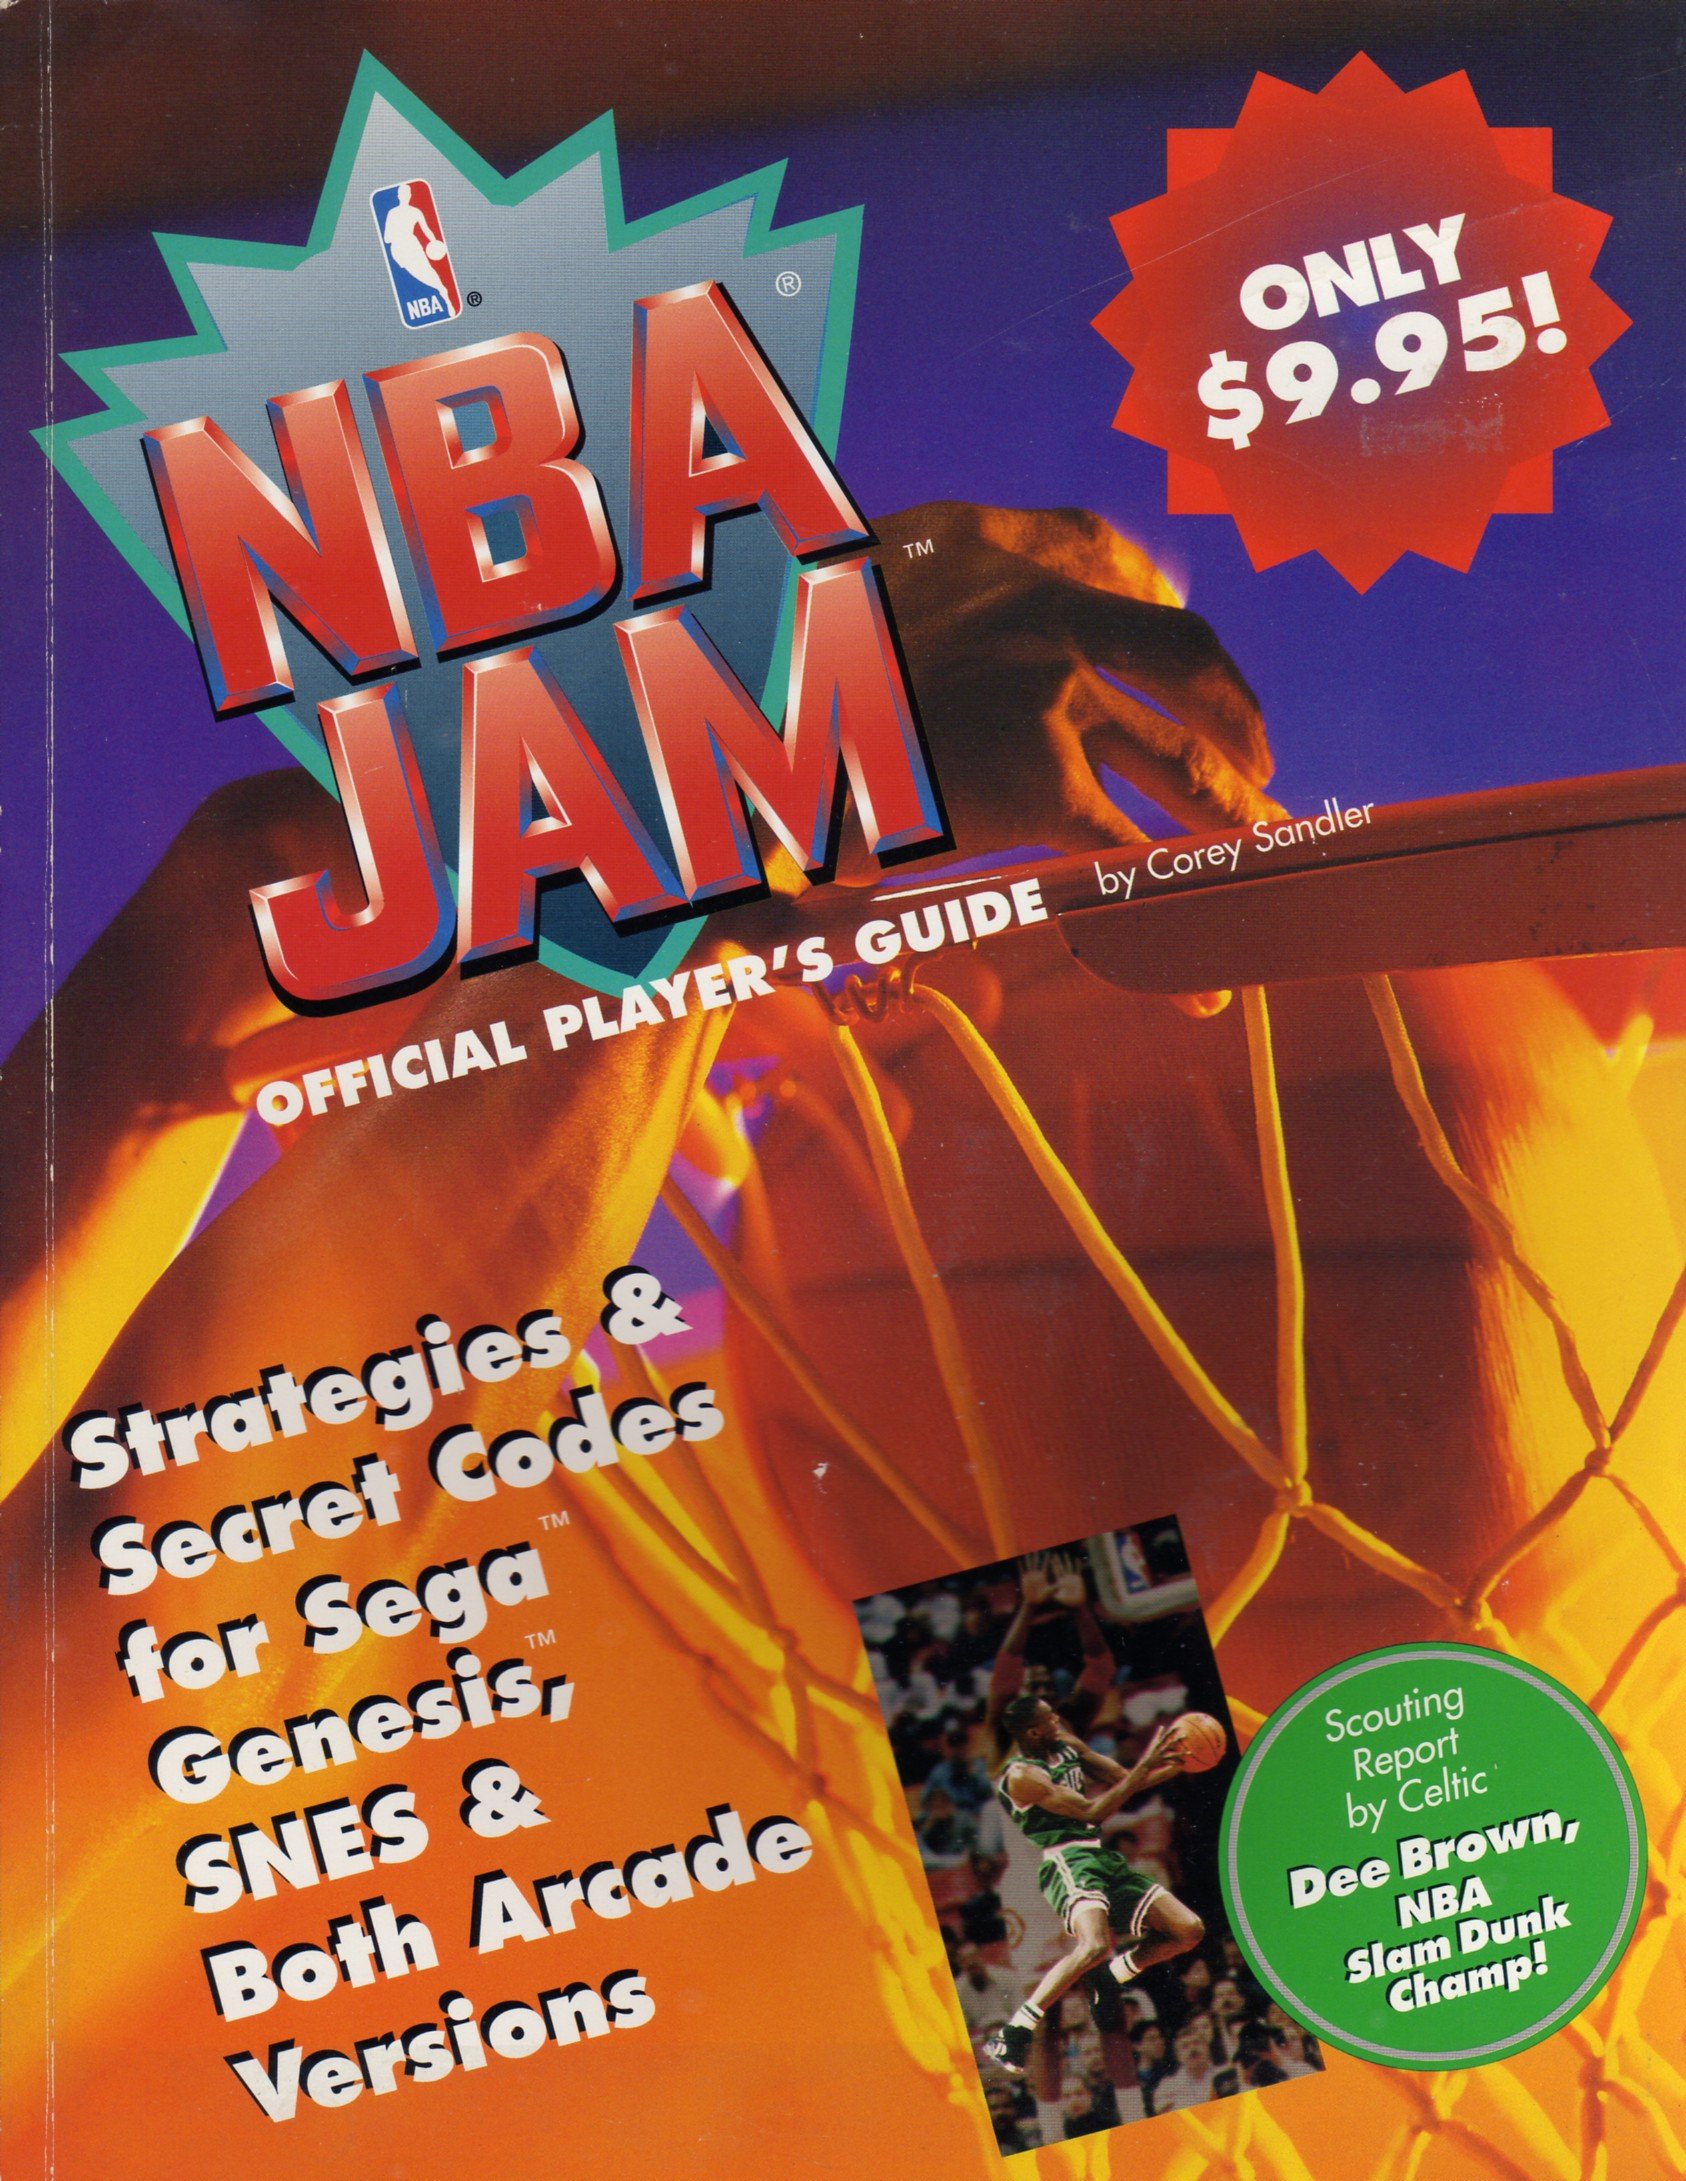 More information about "It's An NBA Jam Thing Official Player's Guide"